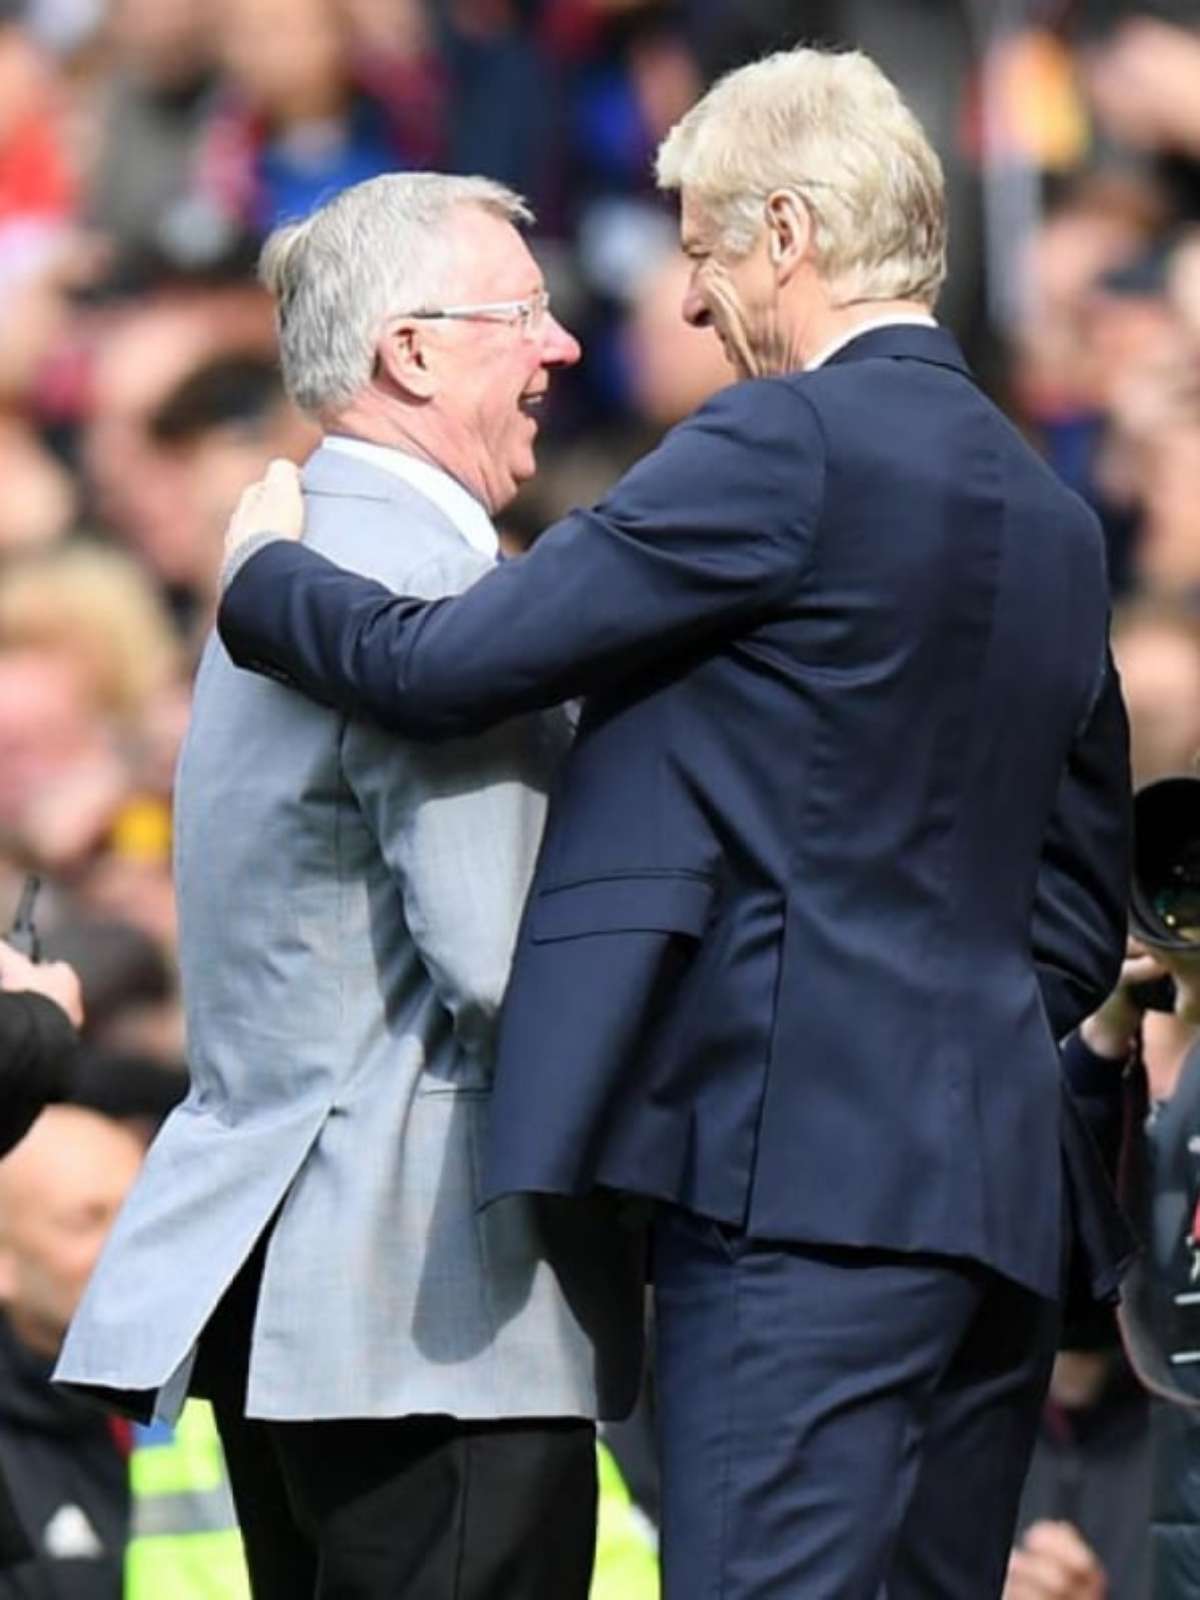 Two legends who helped define the Premier League. Sir Alex Ferguson and  Arsene Wenger are the first two inductees of the 2023 #PLHallOfFame :  r/Gunners